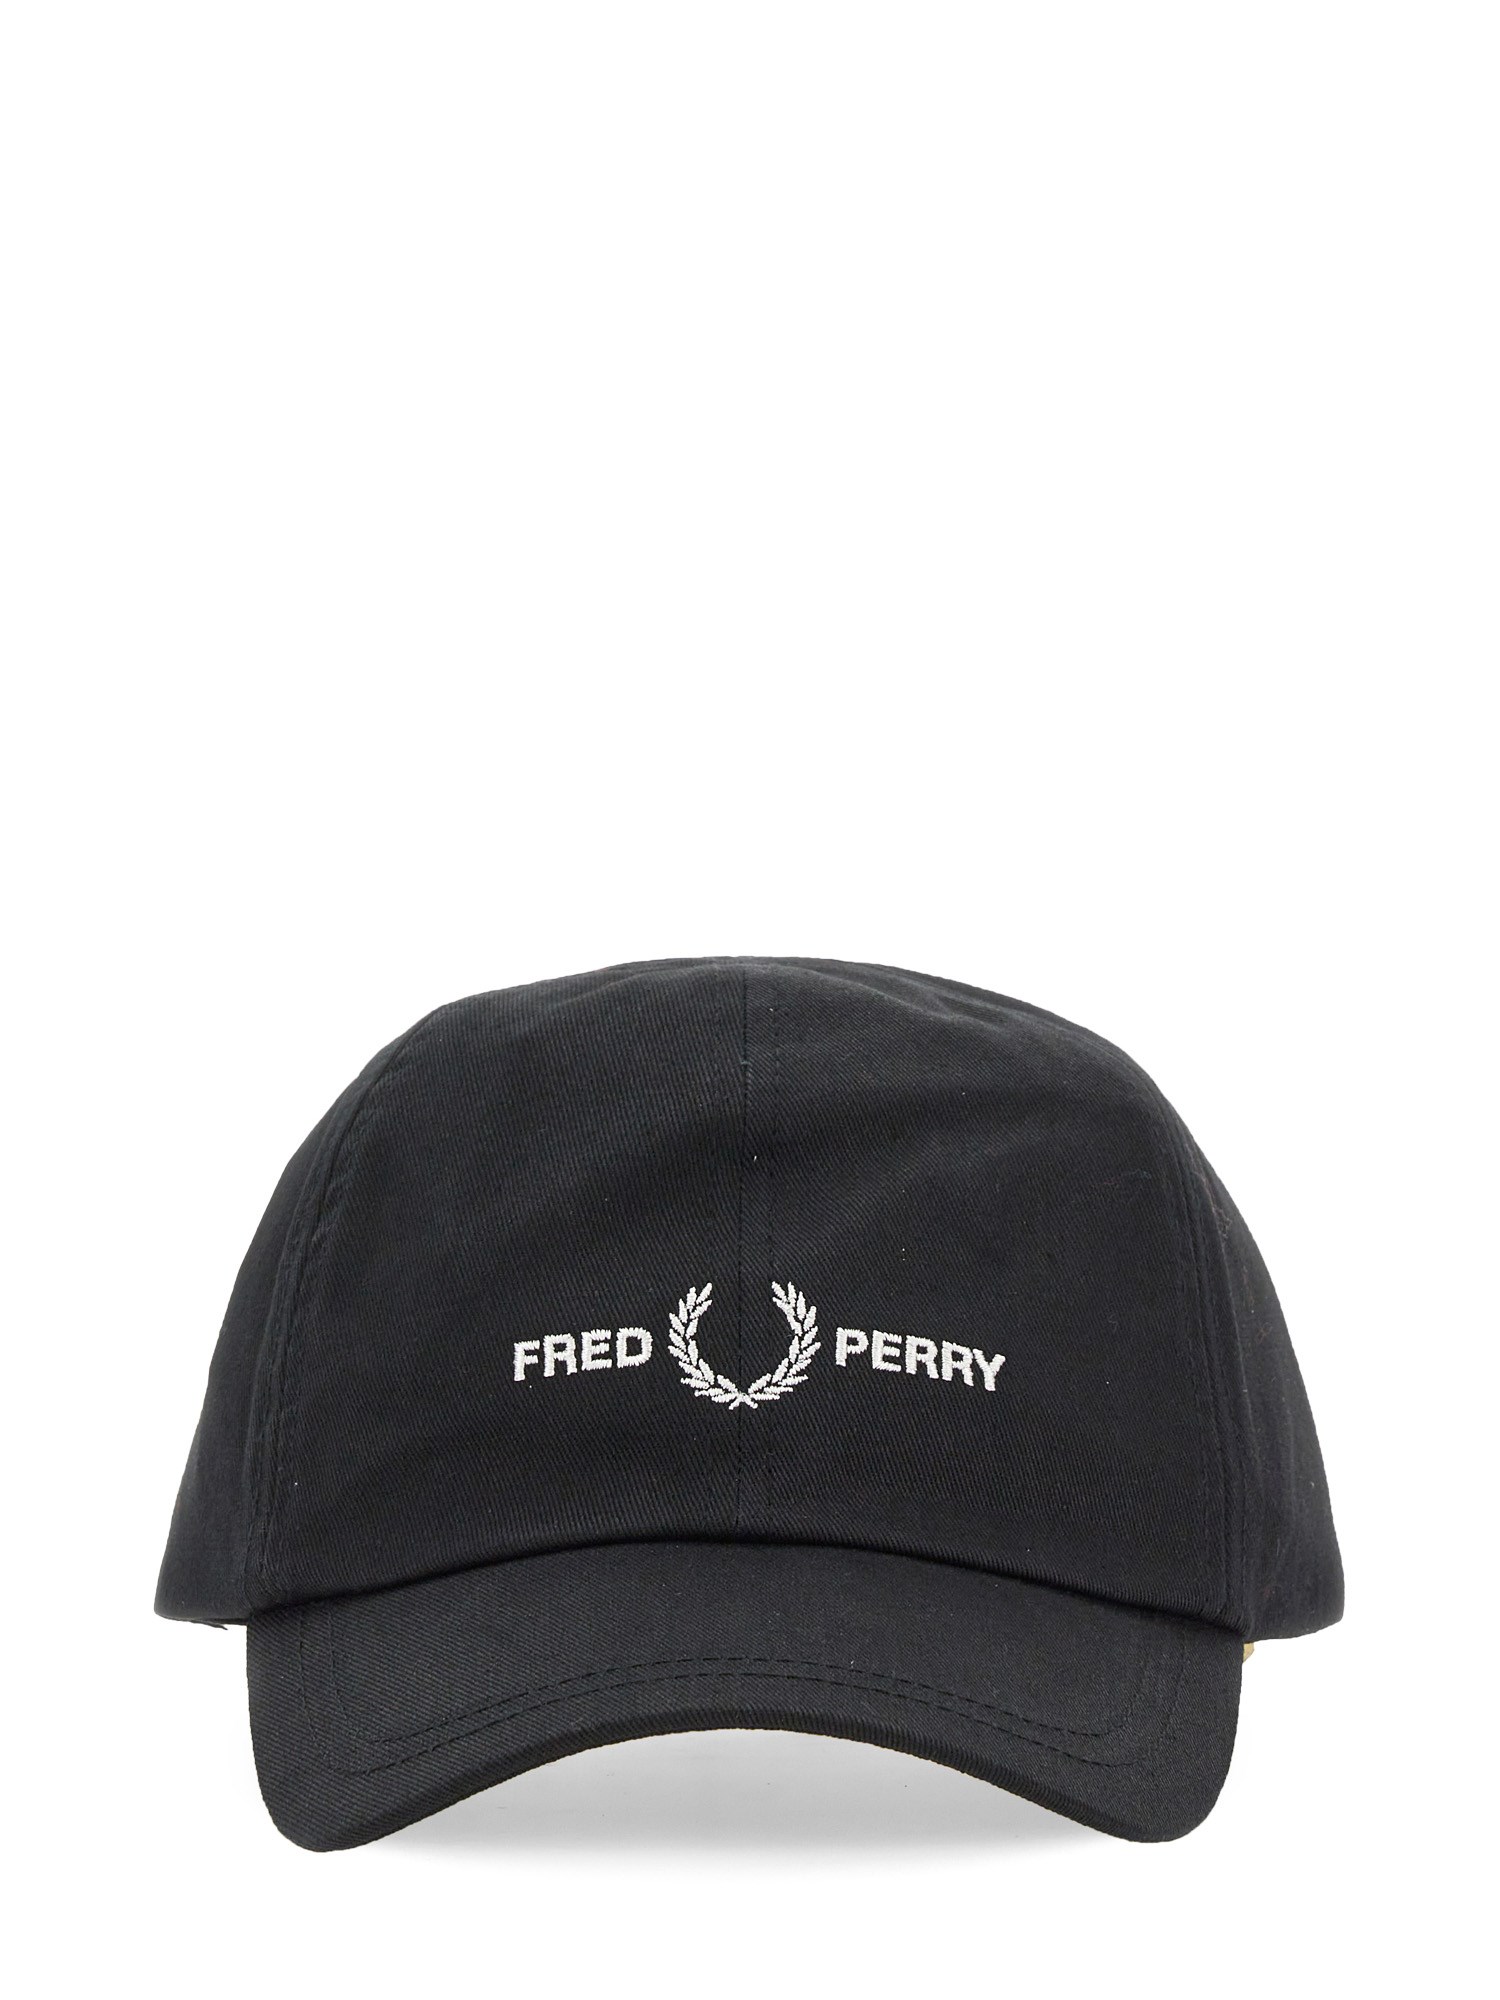 Fred Perry Graphic Branding Twill Cap Black